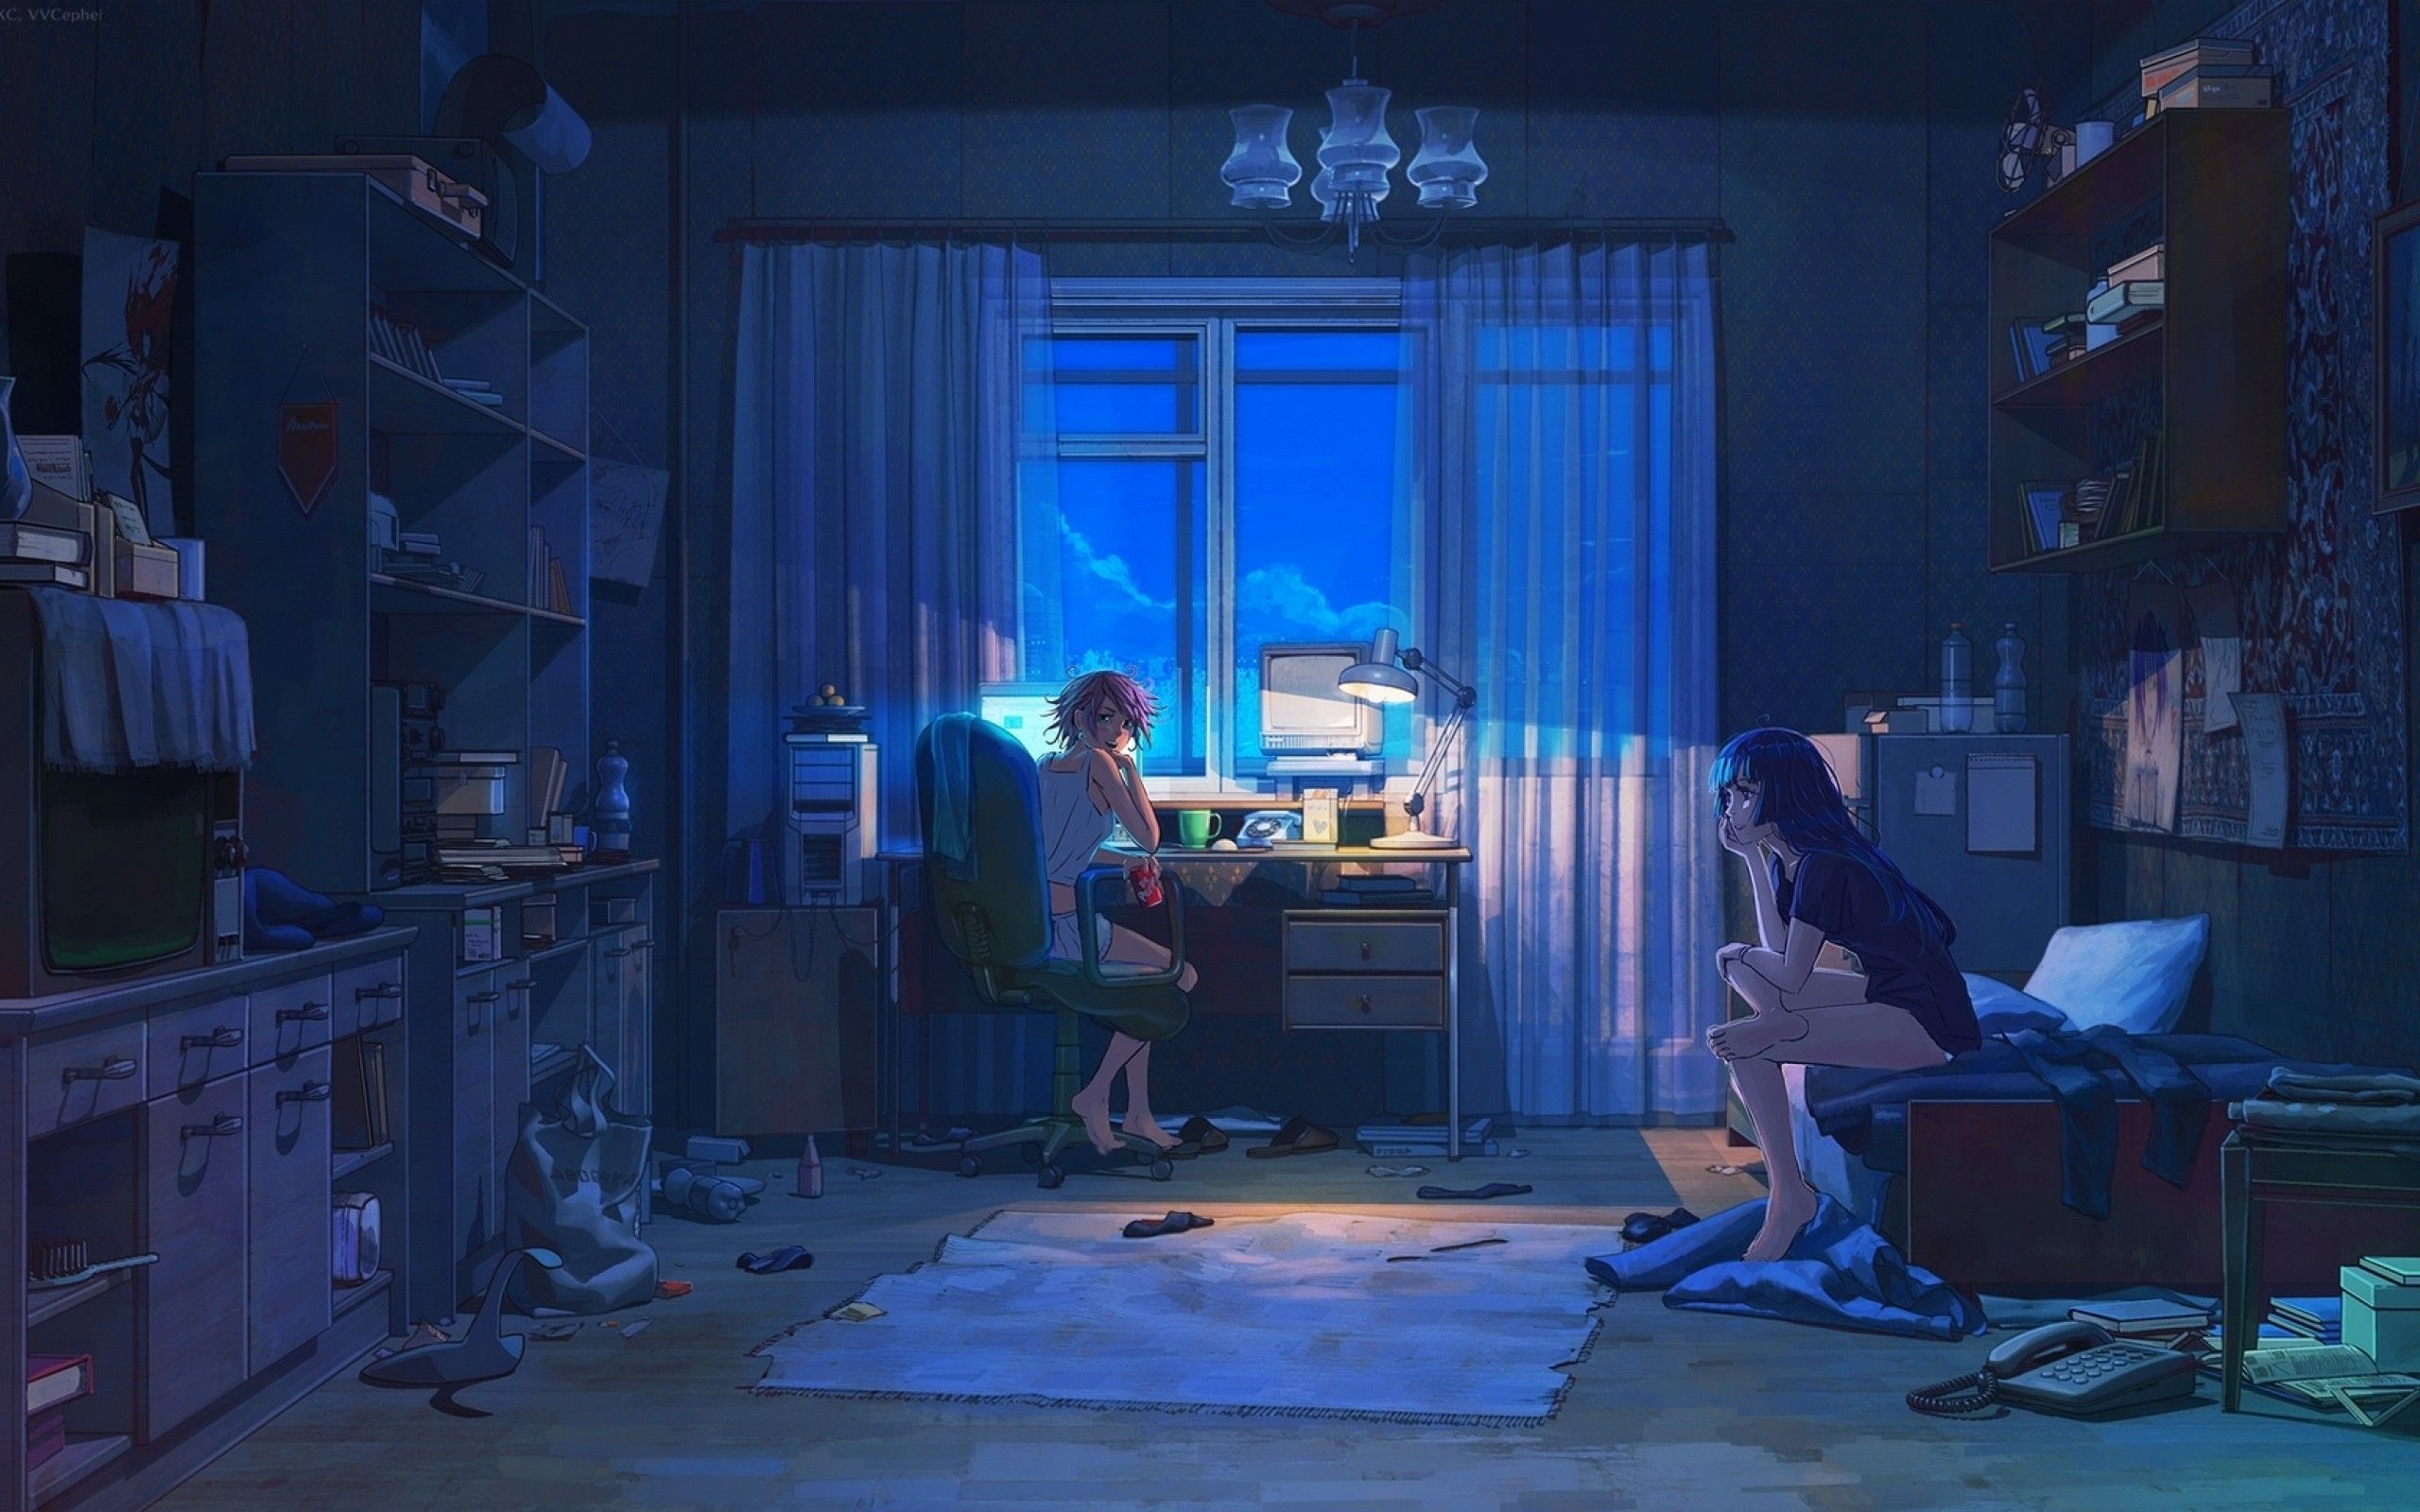 Download 2560x1600 Anime Girl, Room, Night, Computer, Summer Wallpaper for MacBook Pro 13 inch